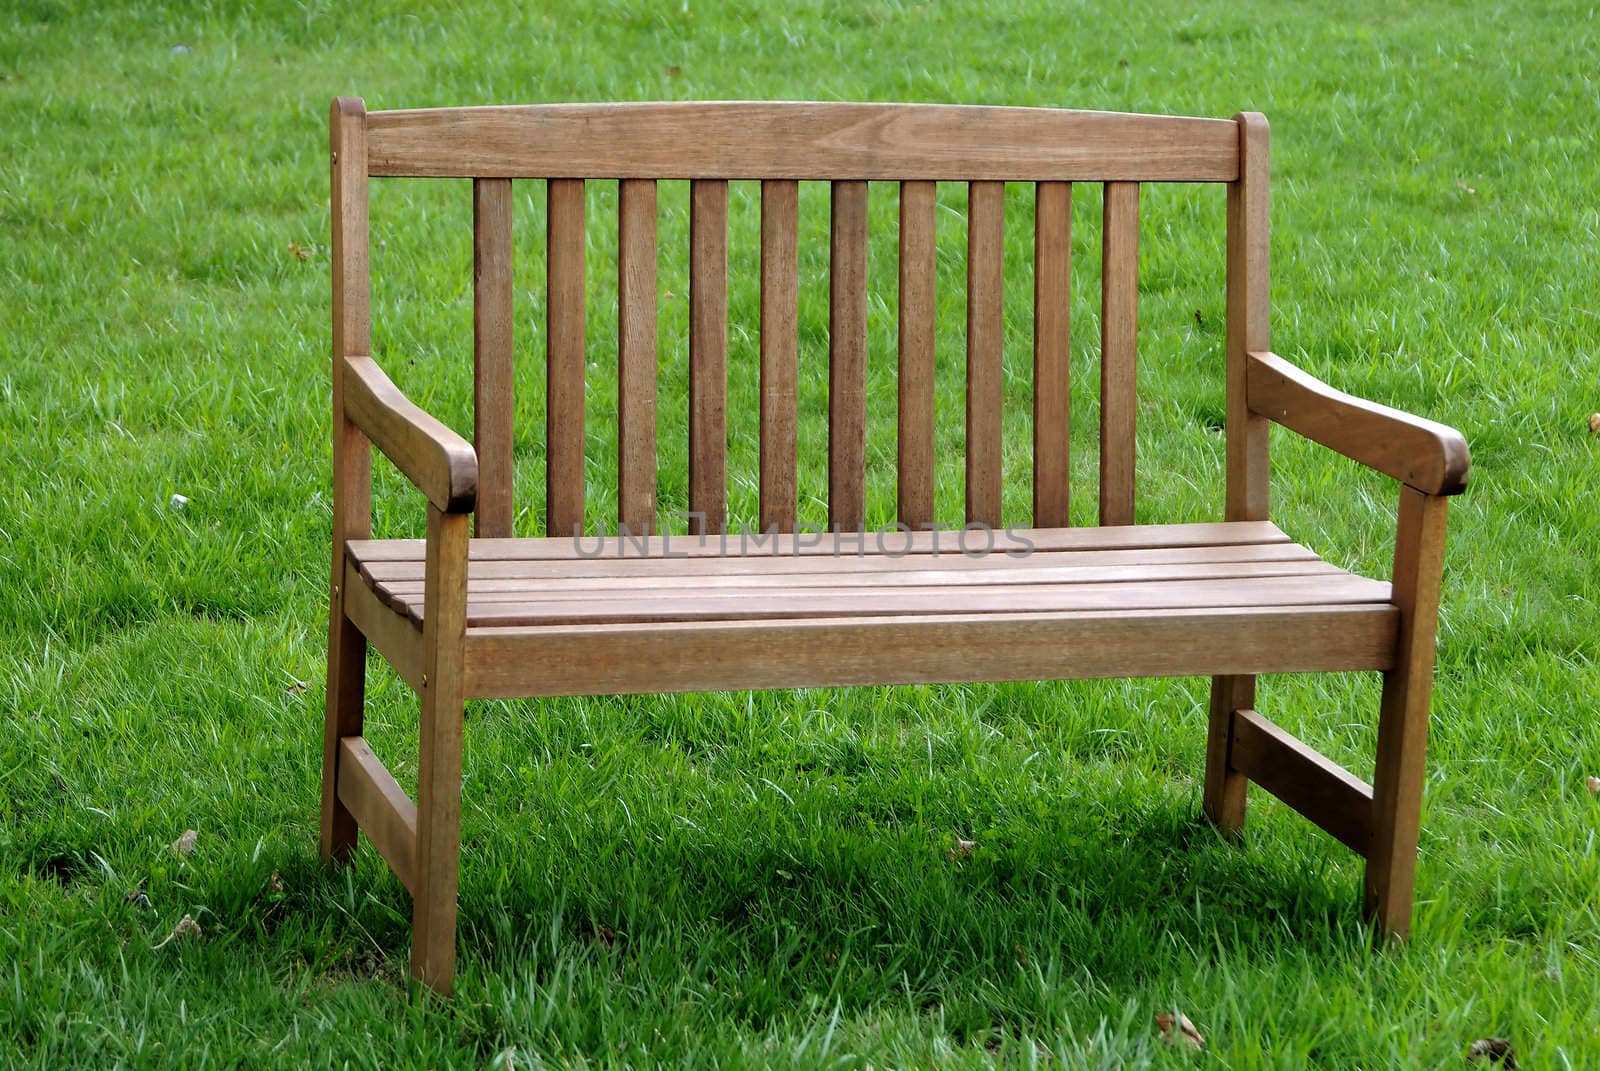 An empty park bench isolated against the grass background